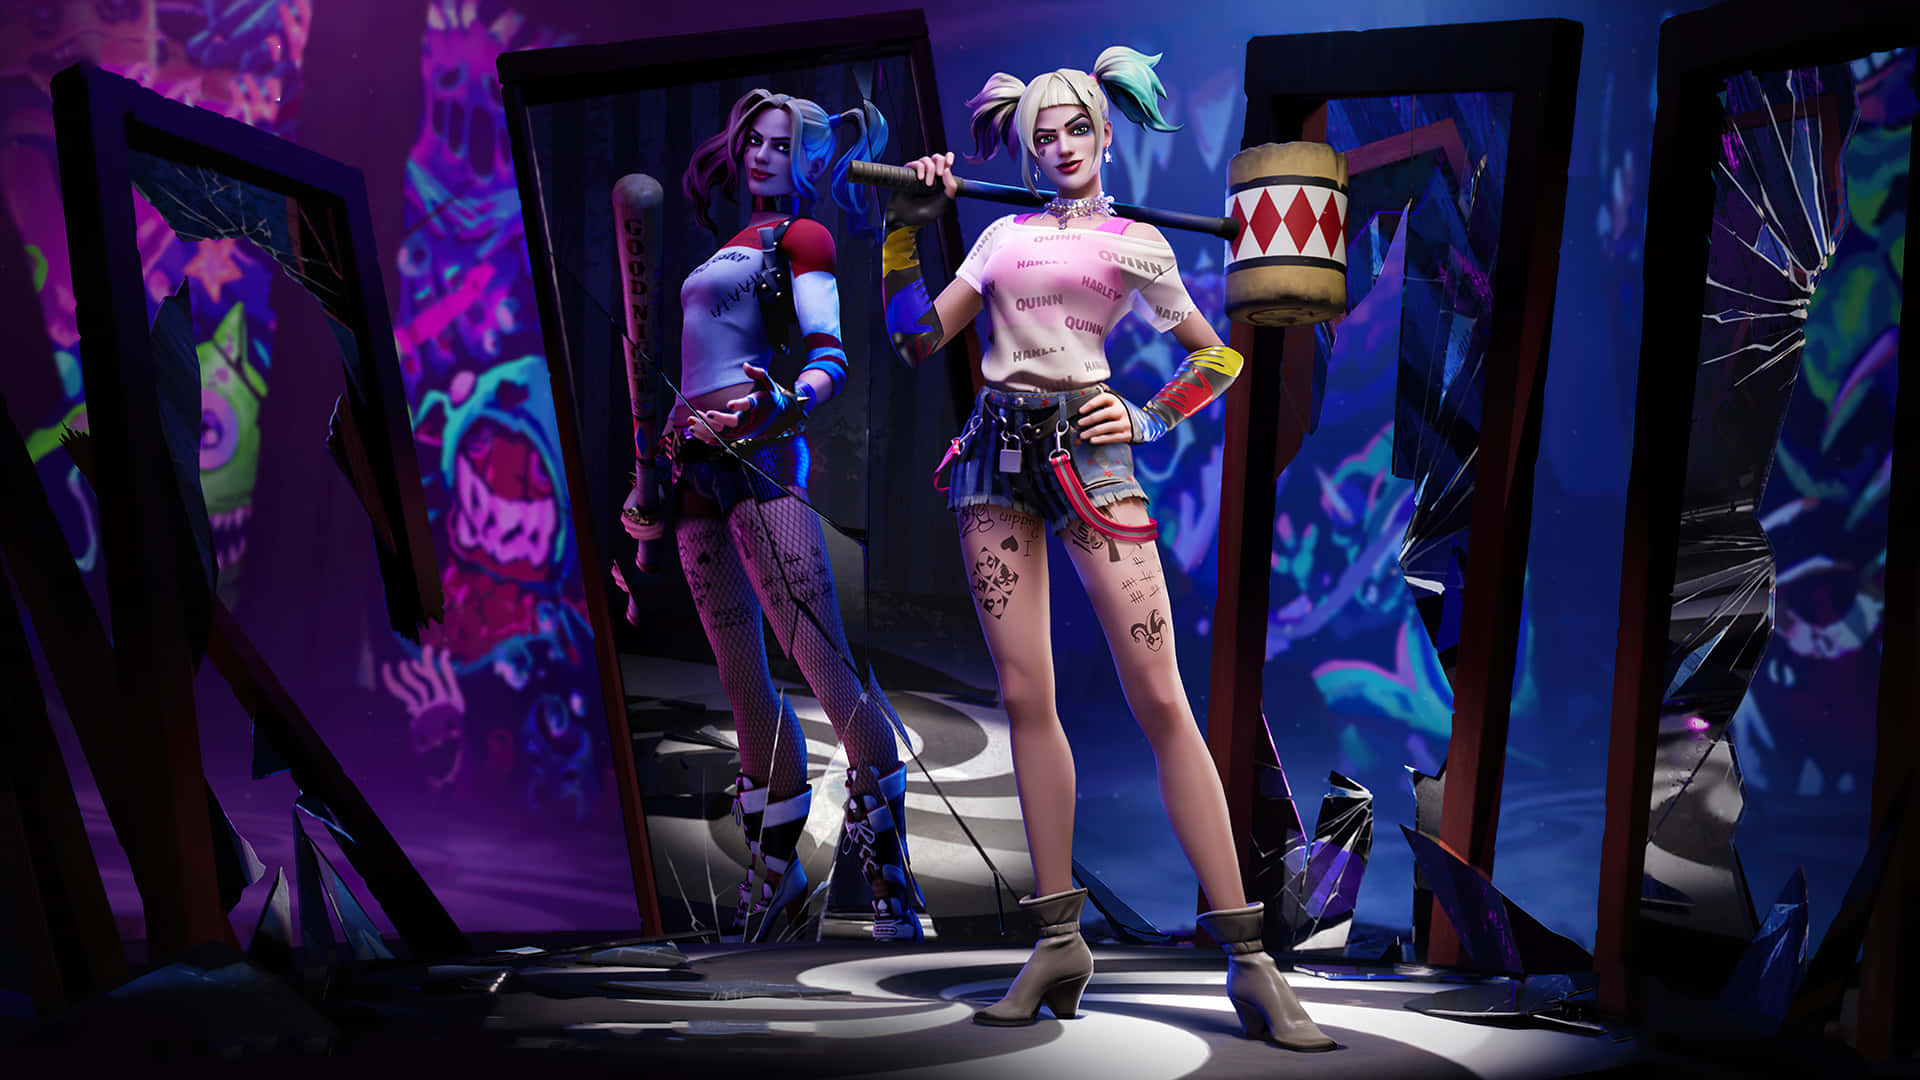 Harley Quinn striking a pose with her iconic hammer Wallpaper